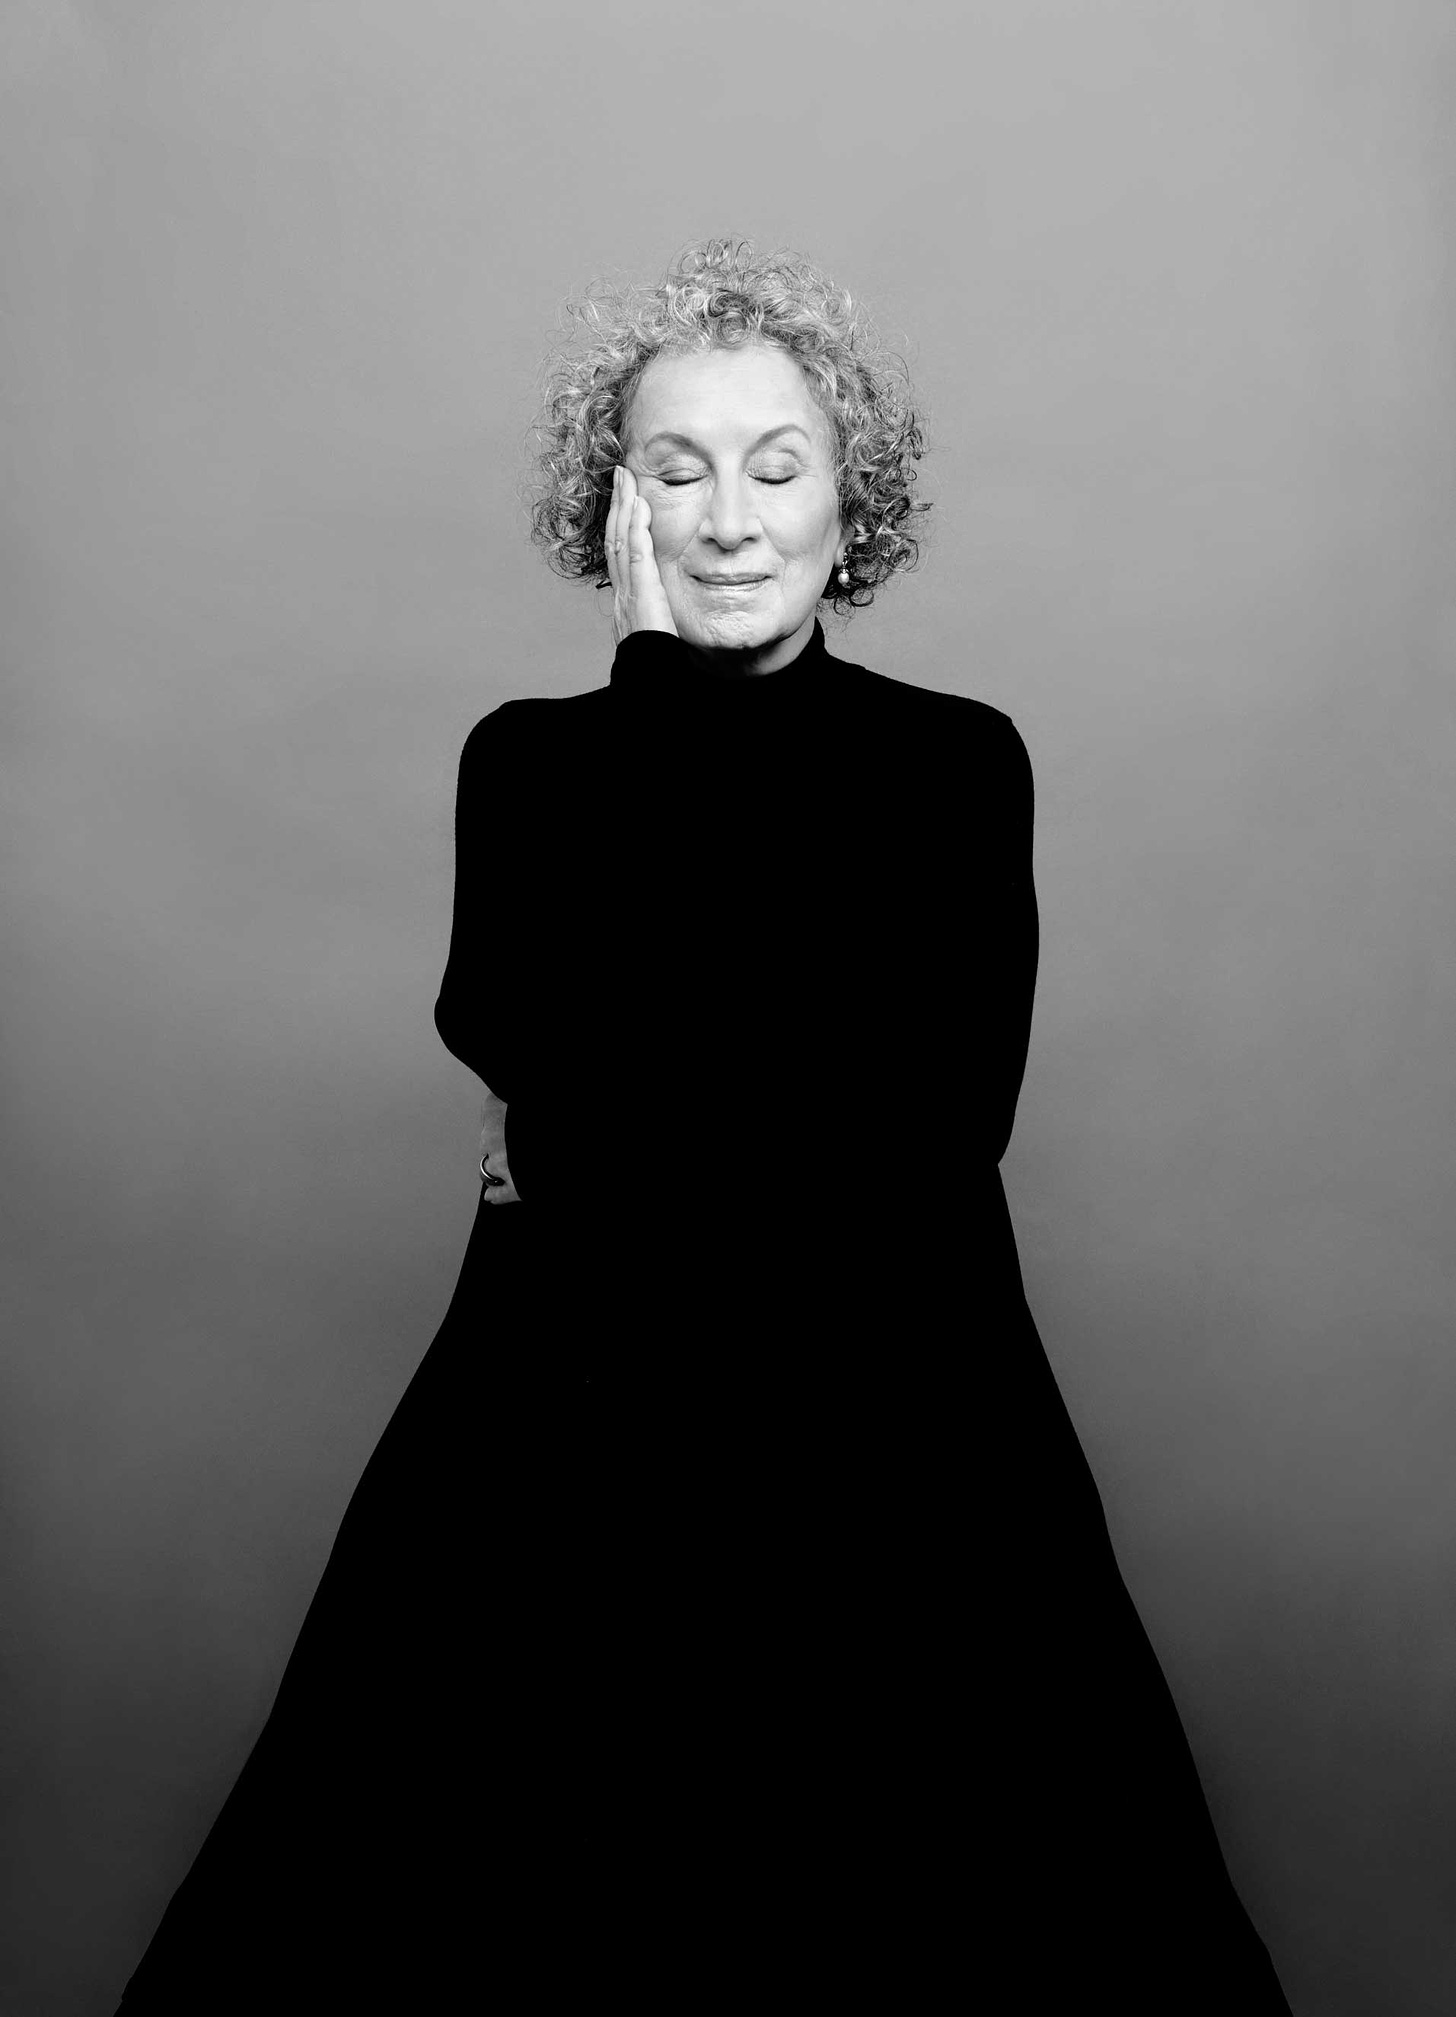 Margaret Atwood on Writing, Language, Literature, and More – BIG OTHER